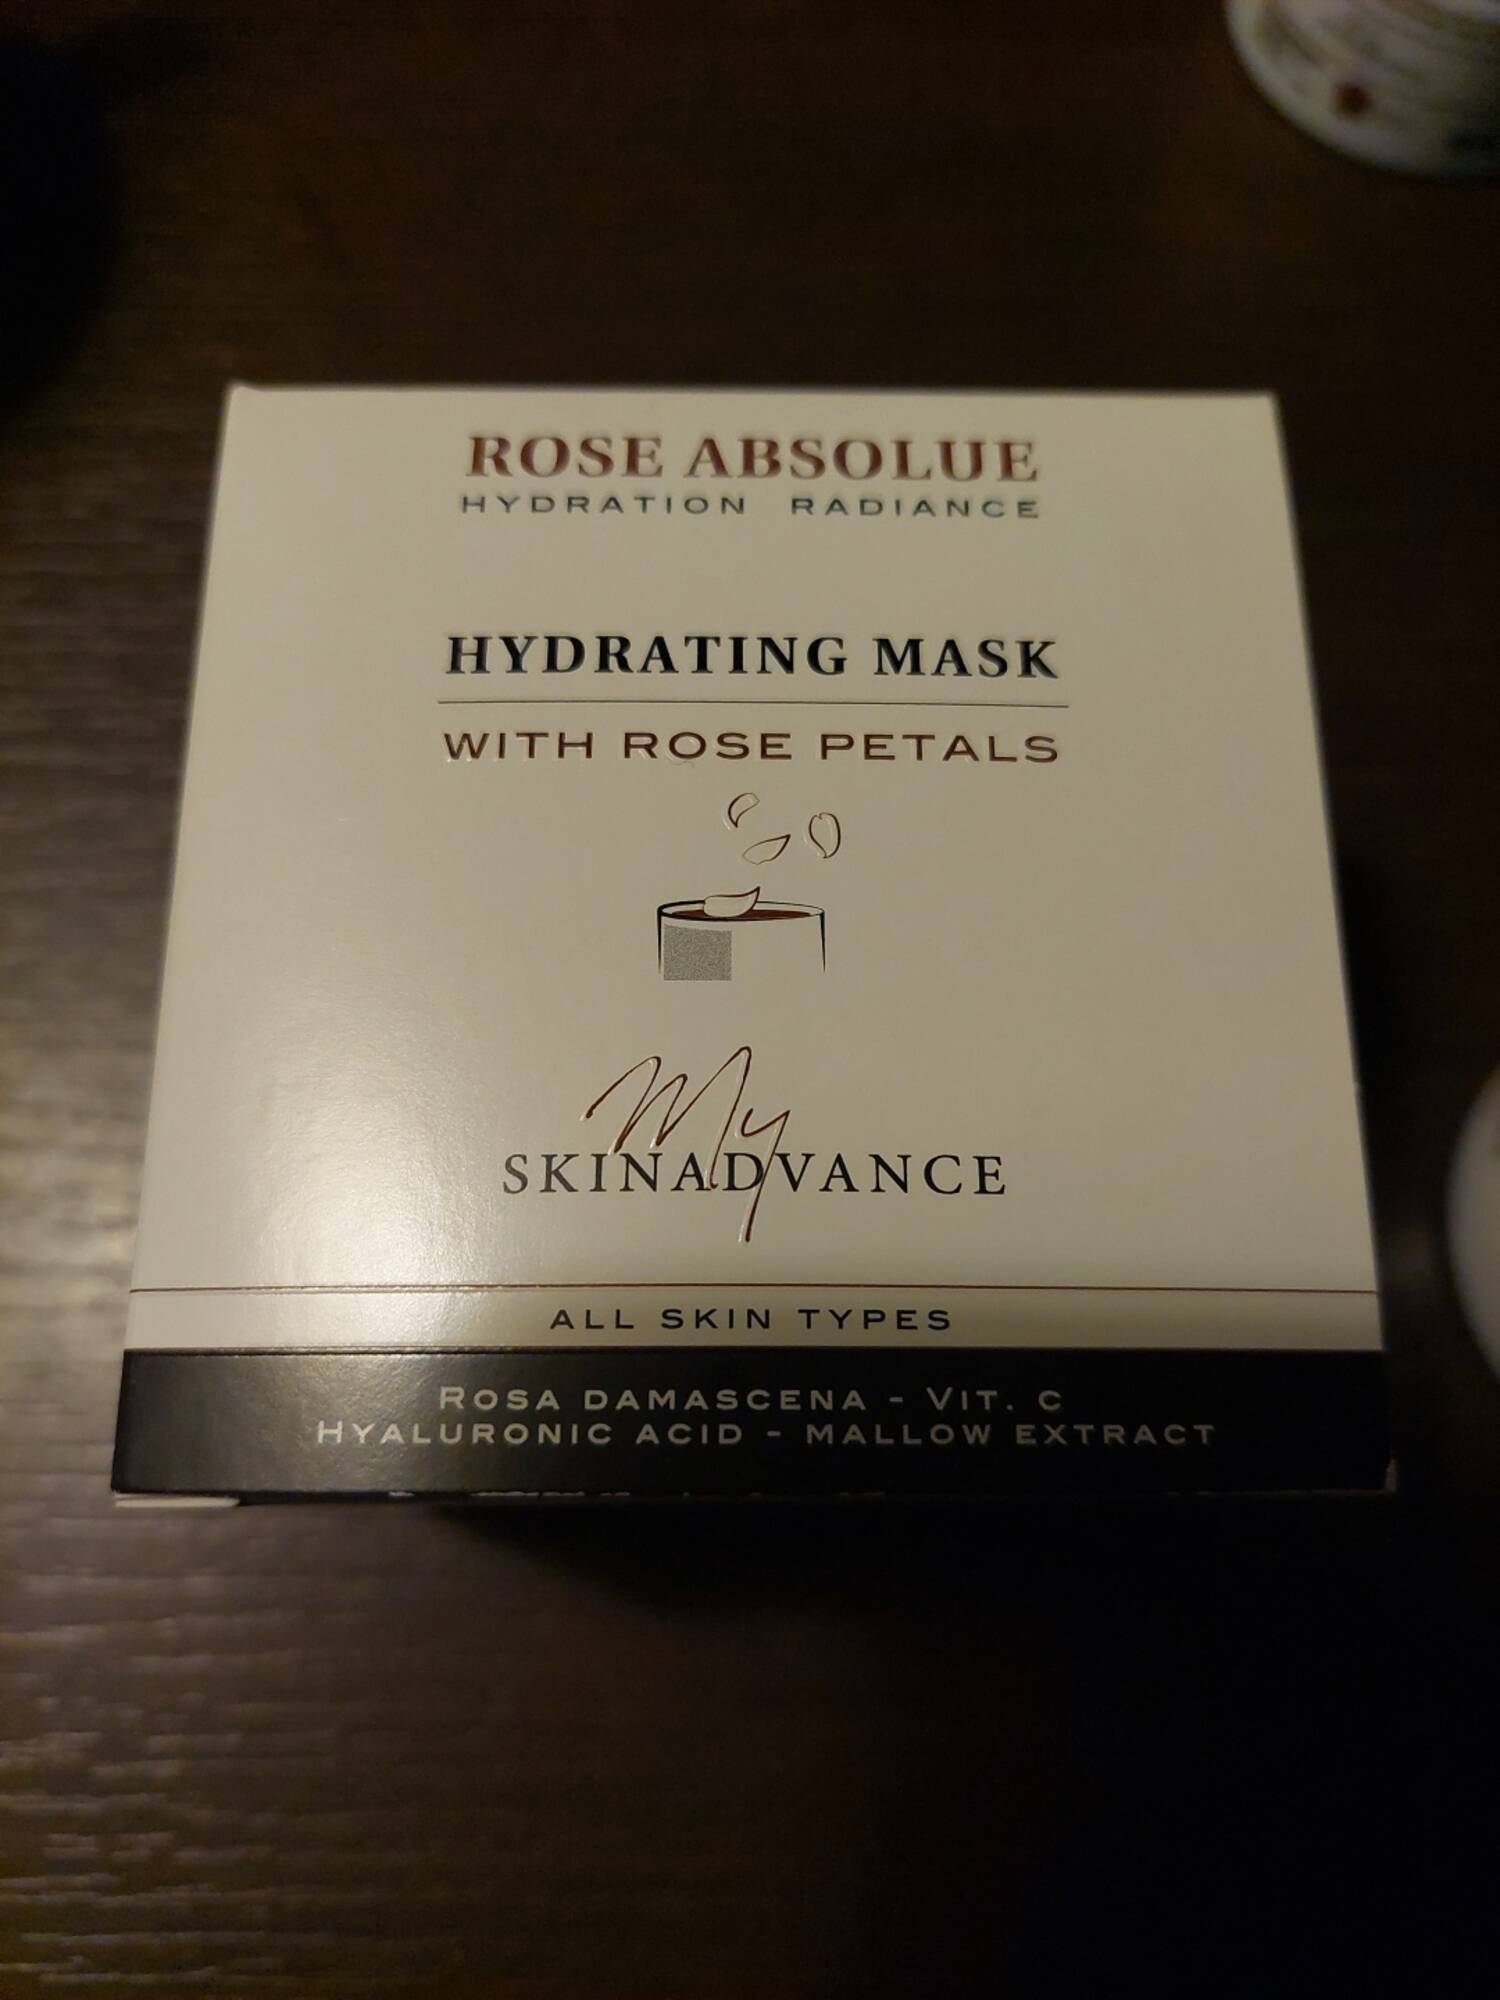 MY SKINADVANCE - Rose absolue - Hydrating mask with rose petals